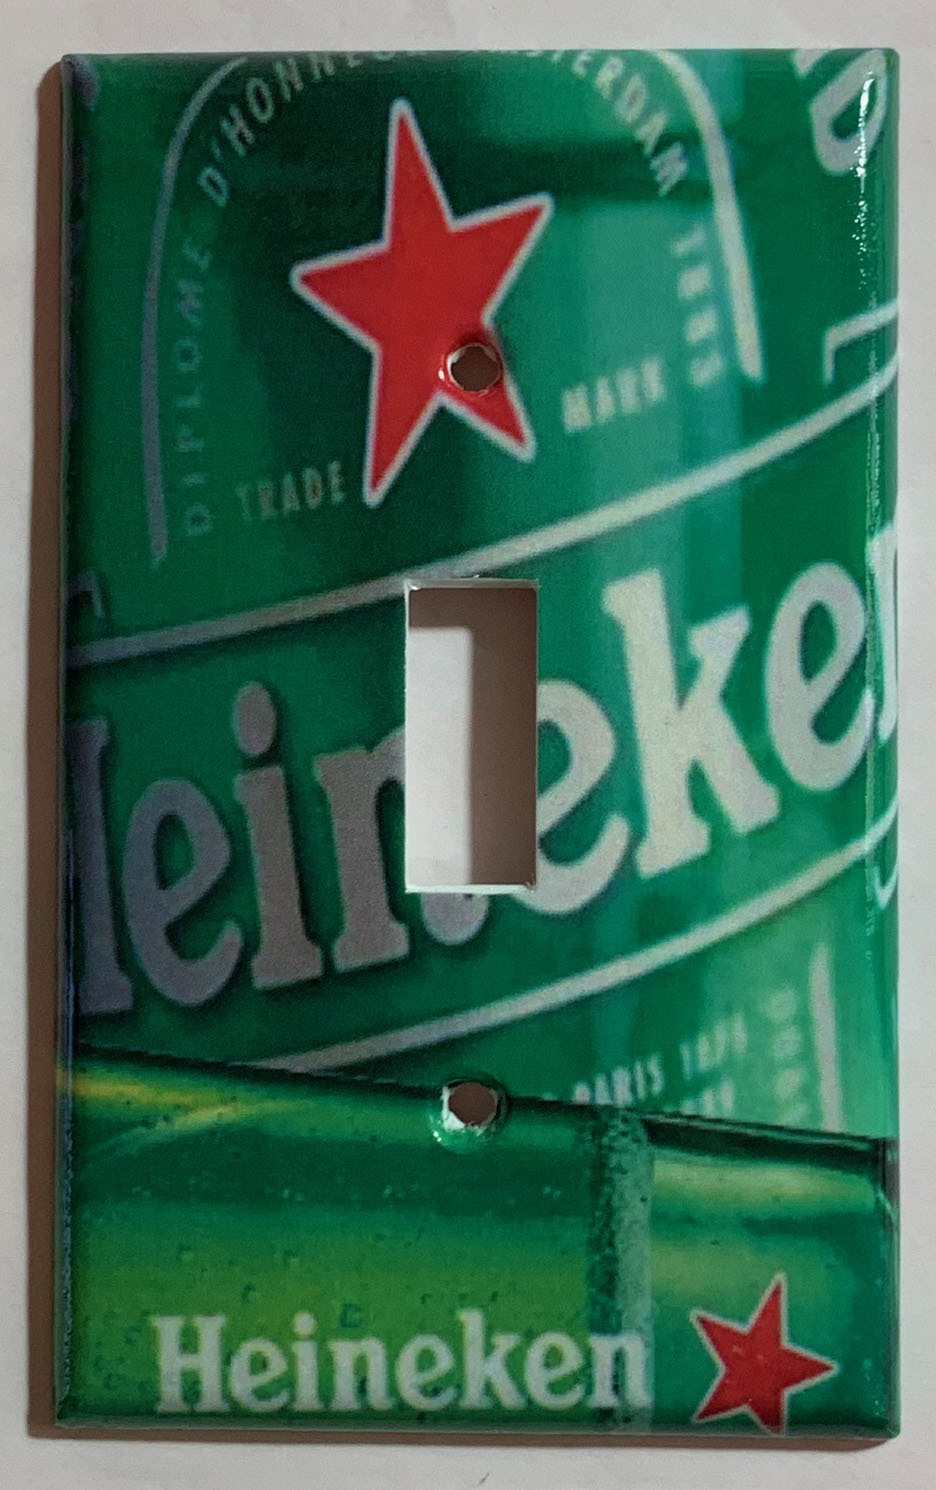 Heineken Beer Cans bottle Light Switch Power Outlet wall Cover Plate Home Decor